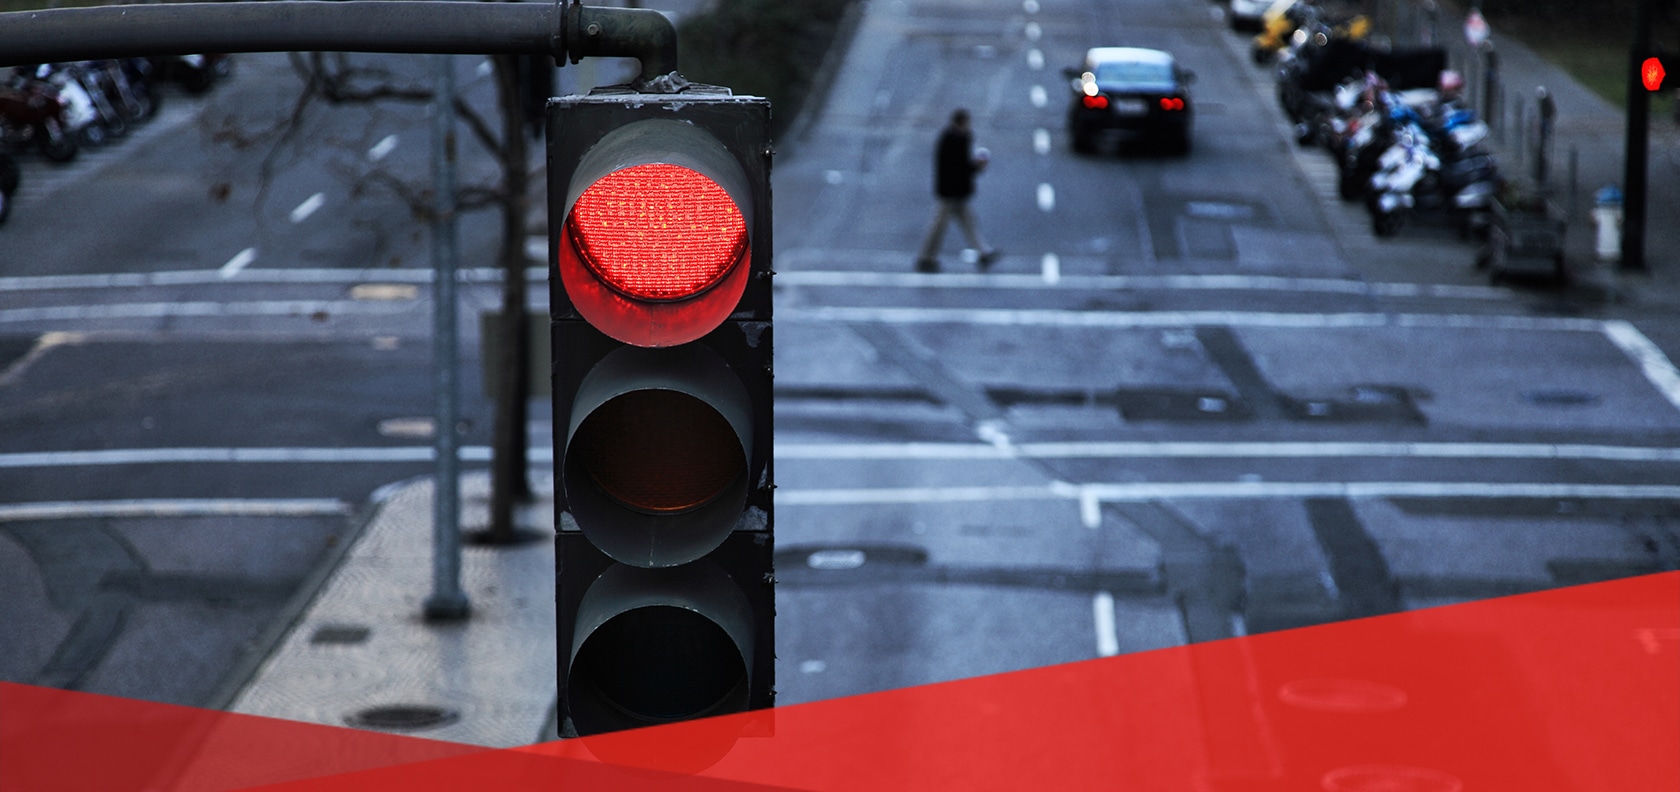 What Do Traffic Signals Mean? - MAPFRE Insurance